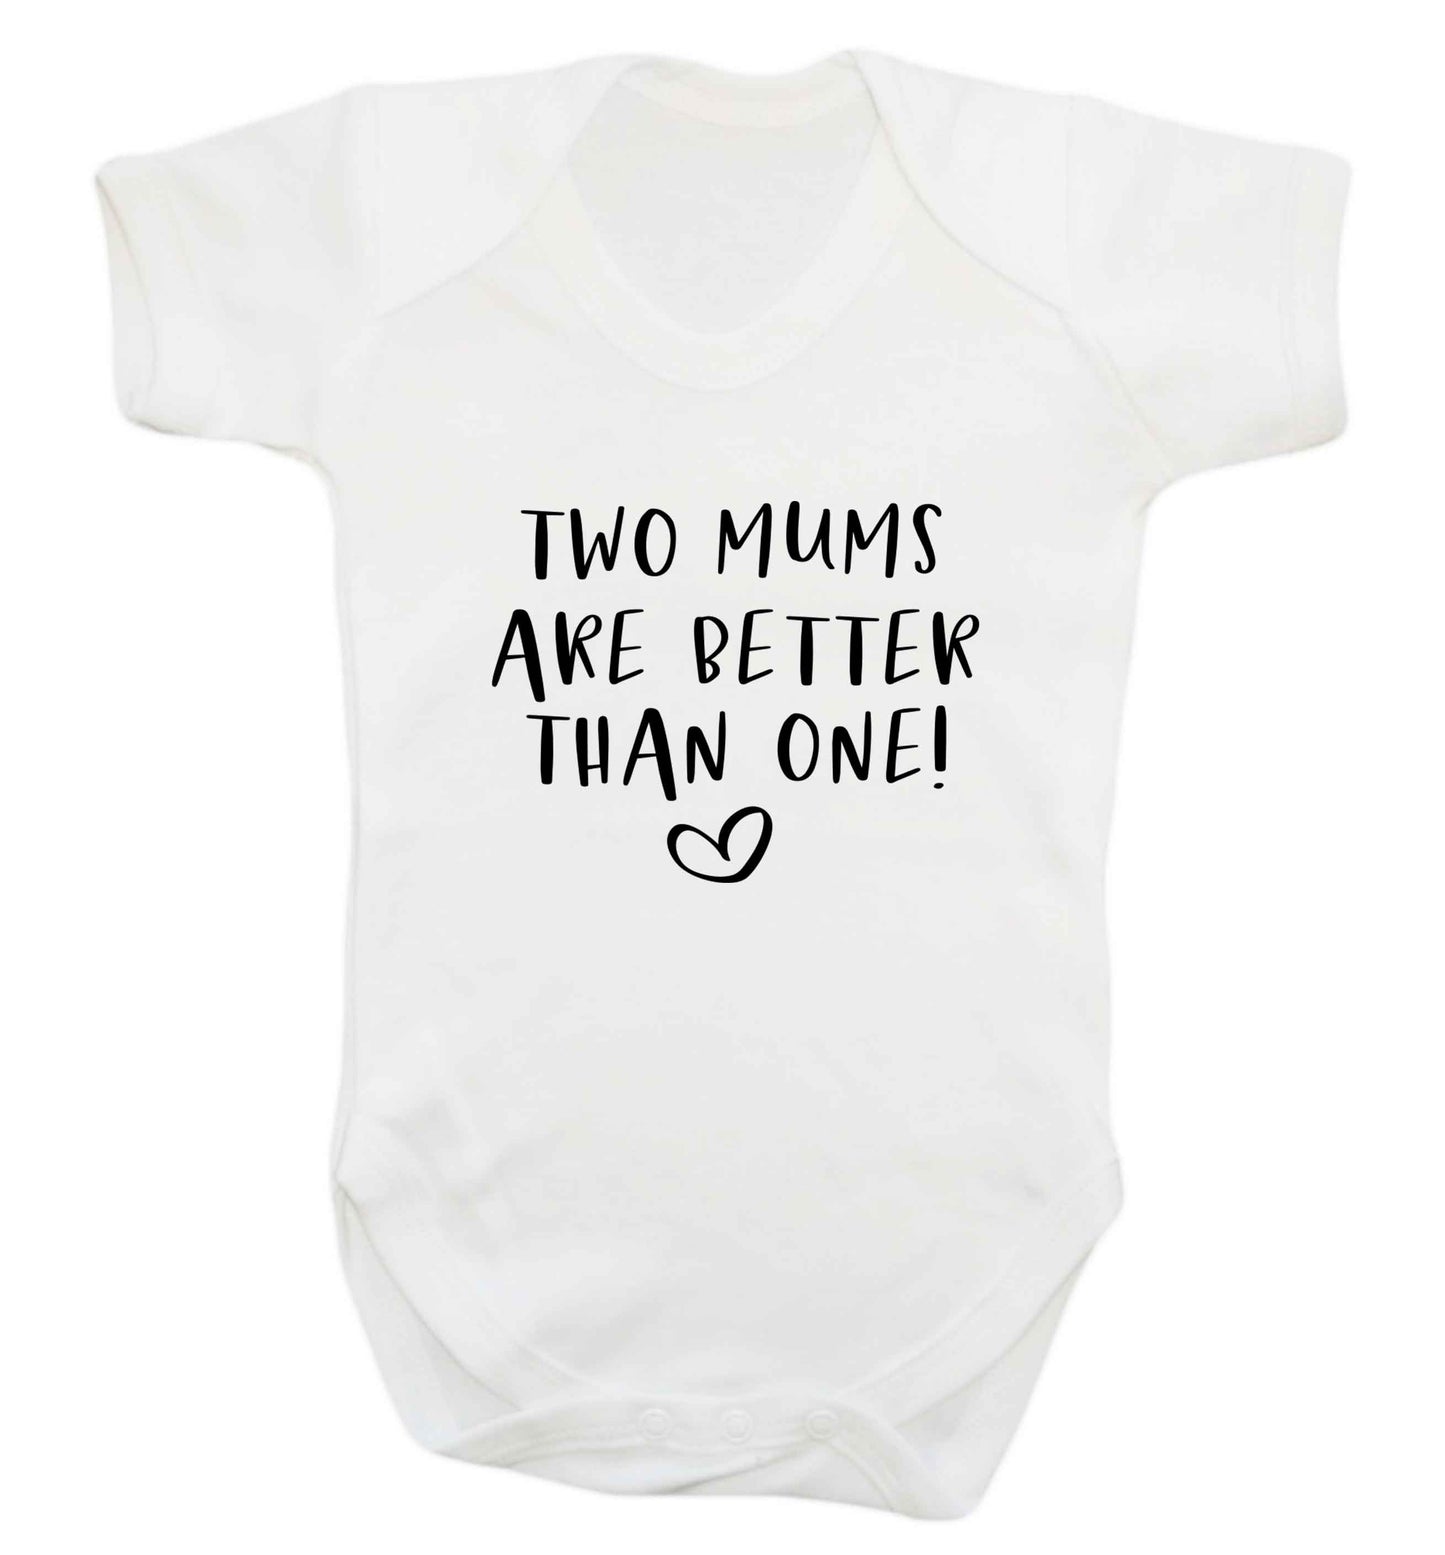 Two mums are better than one baby vest white 18-24 months